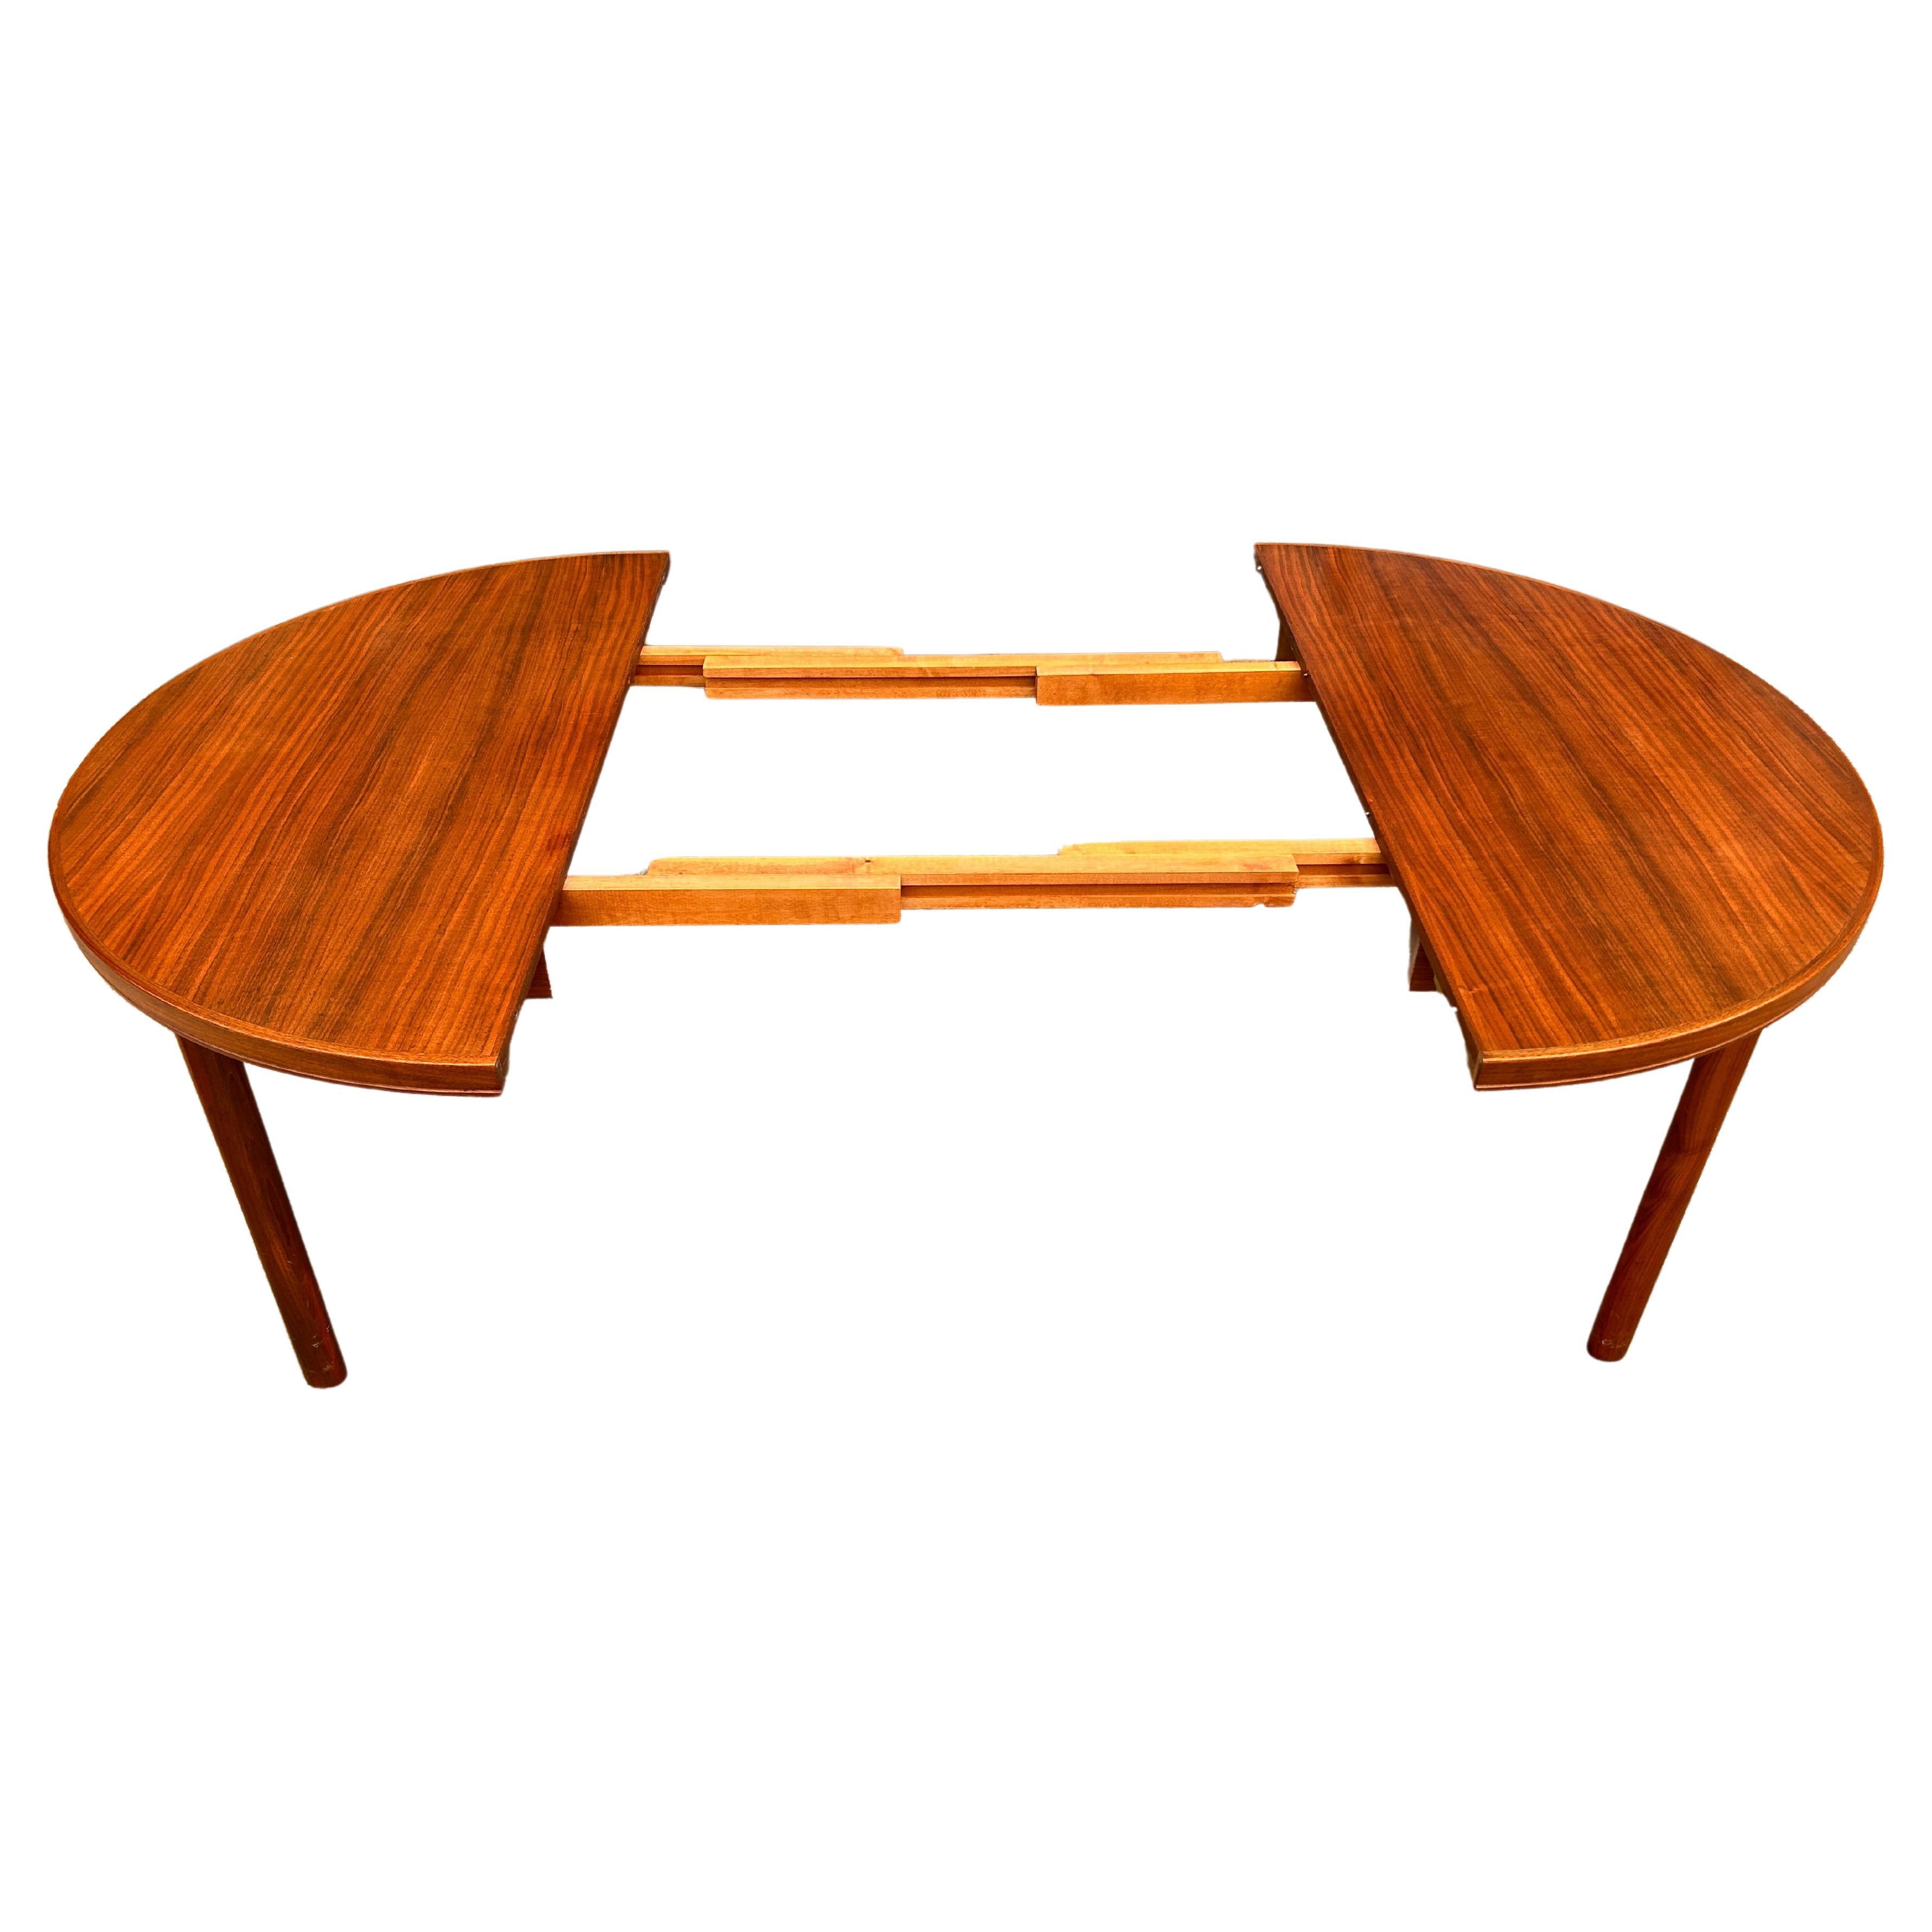 Mid-Century Modern Midcentury Swedish Modern Round Teak Dining Table by DUX with 2 Leaves For Sale